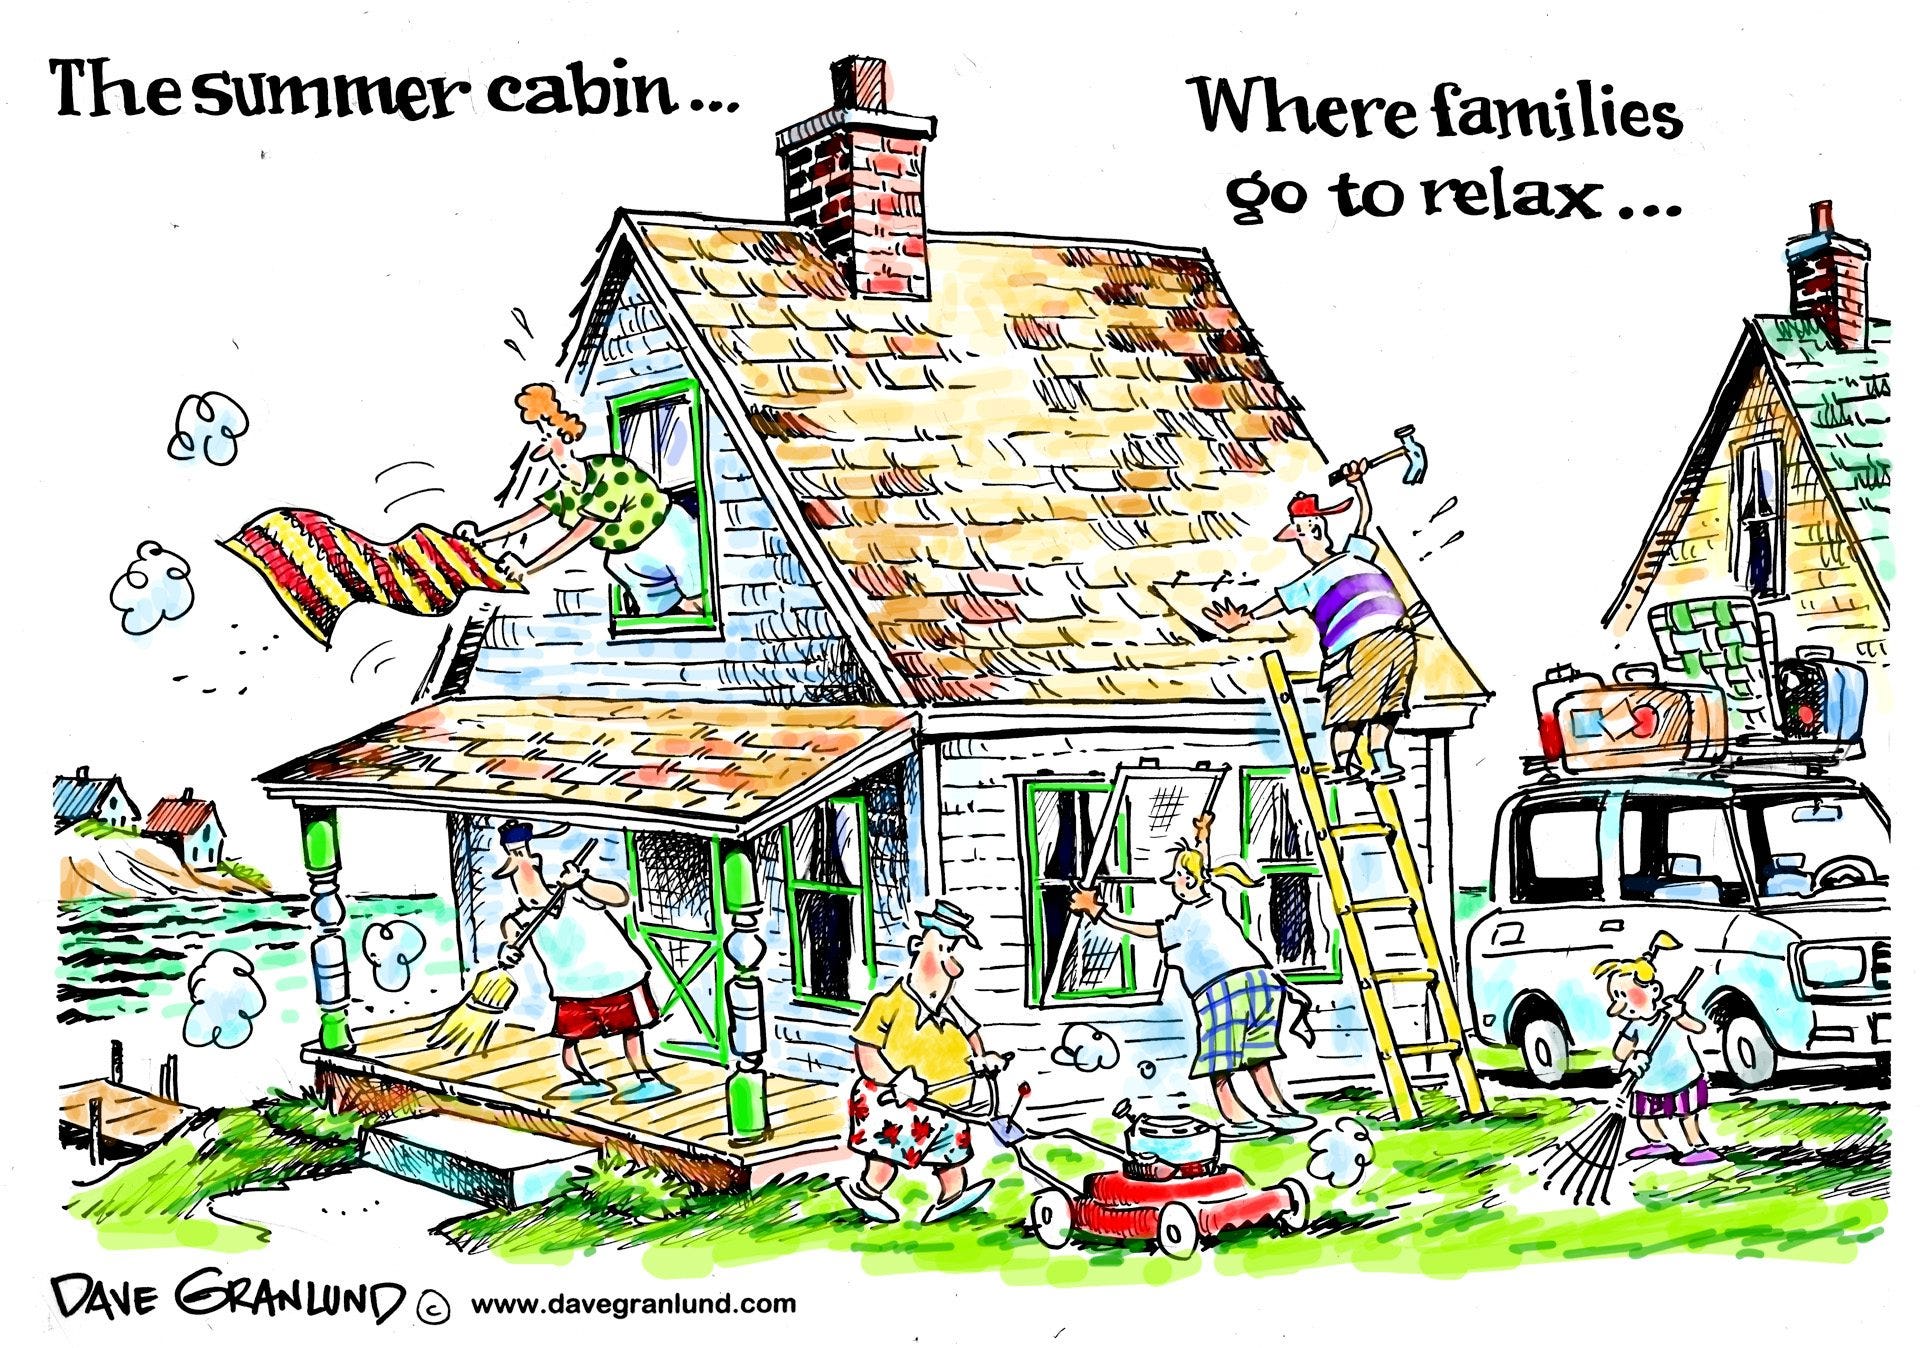 Dave granlund relaxing in the summertime